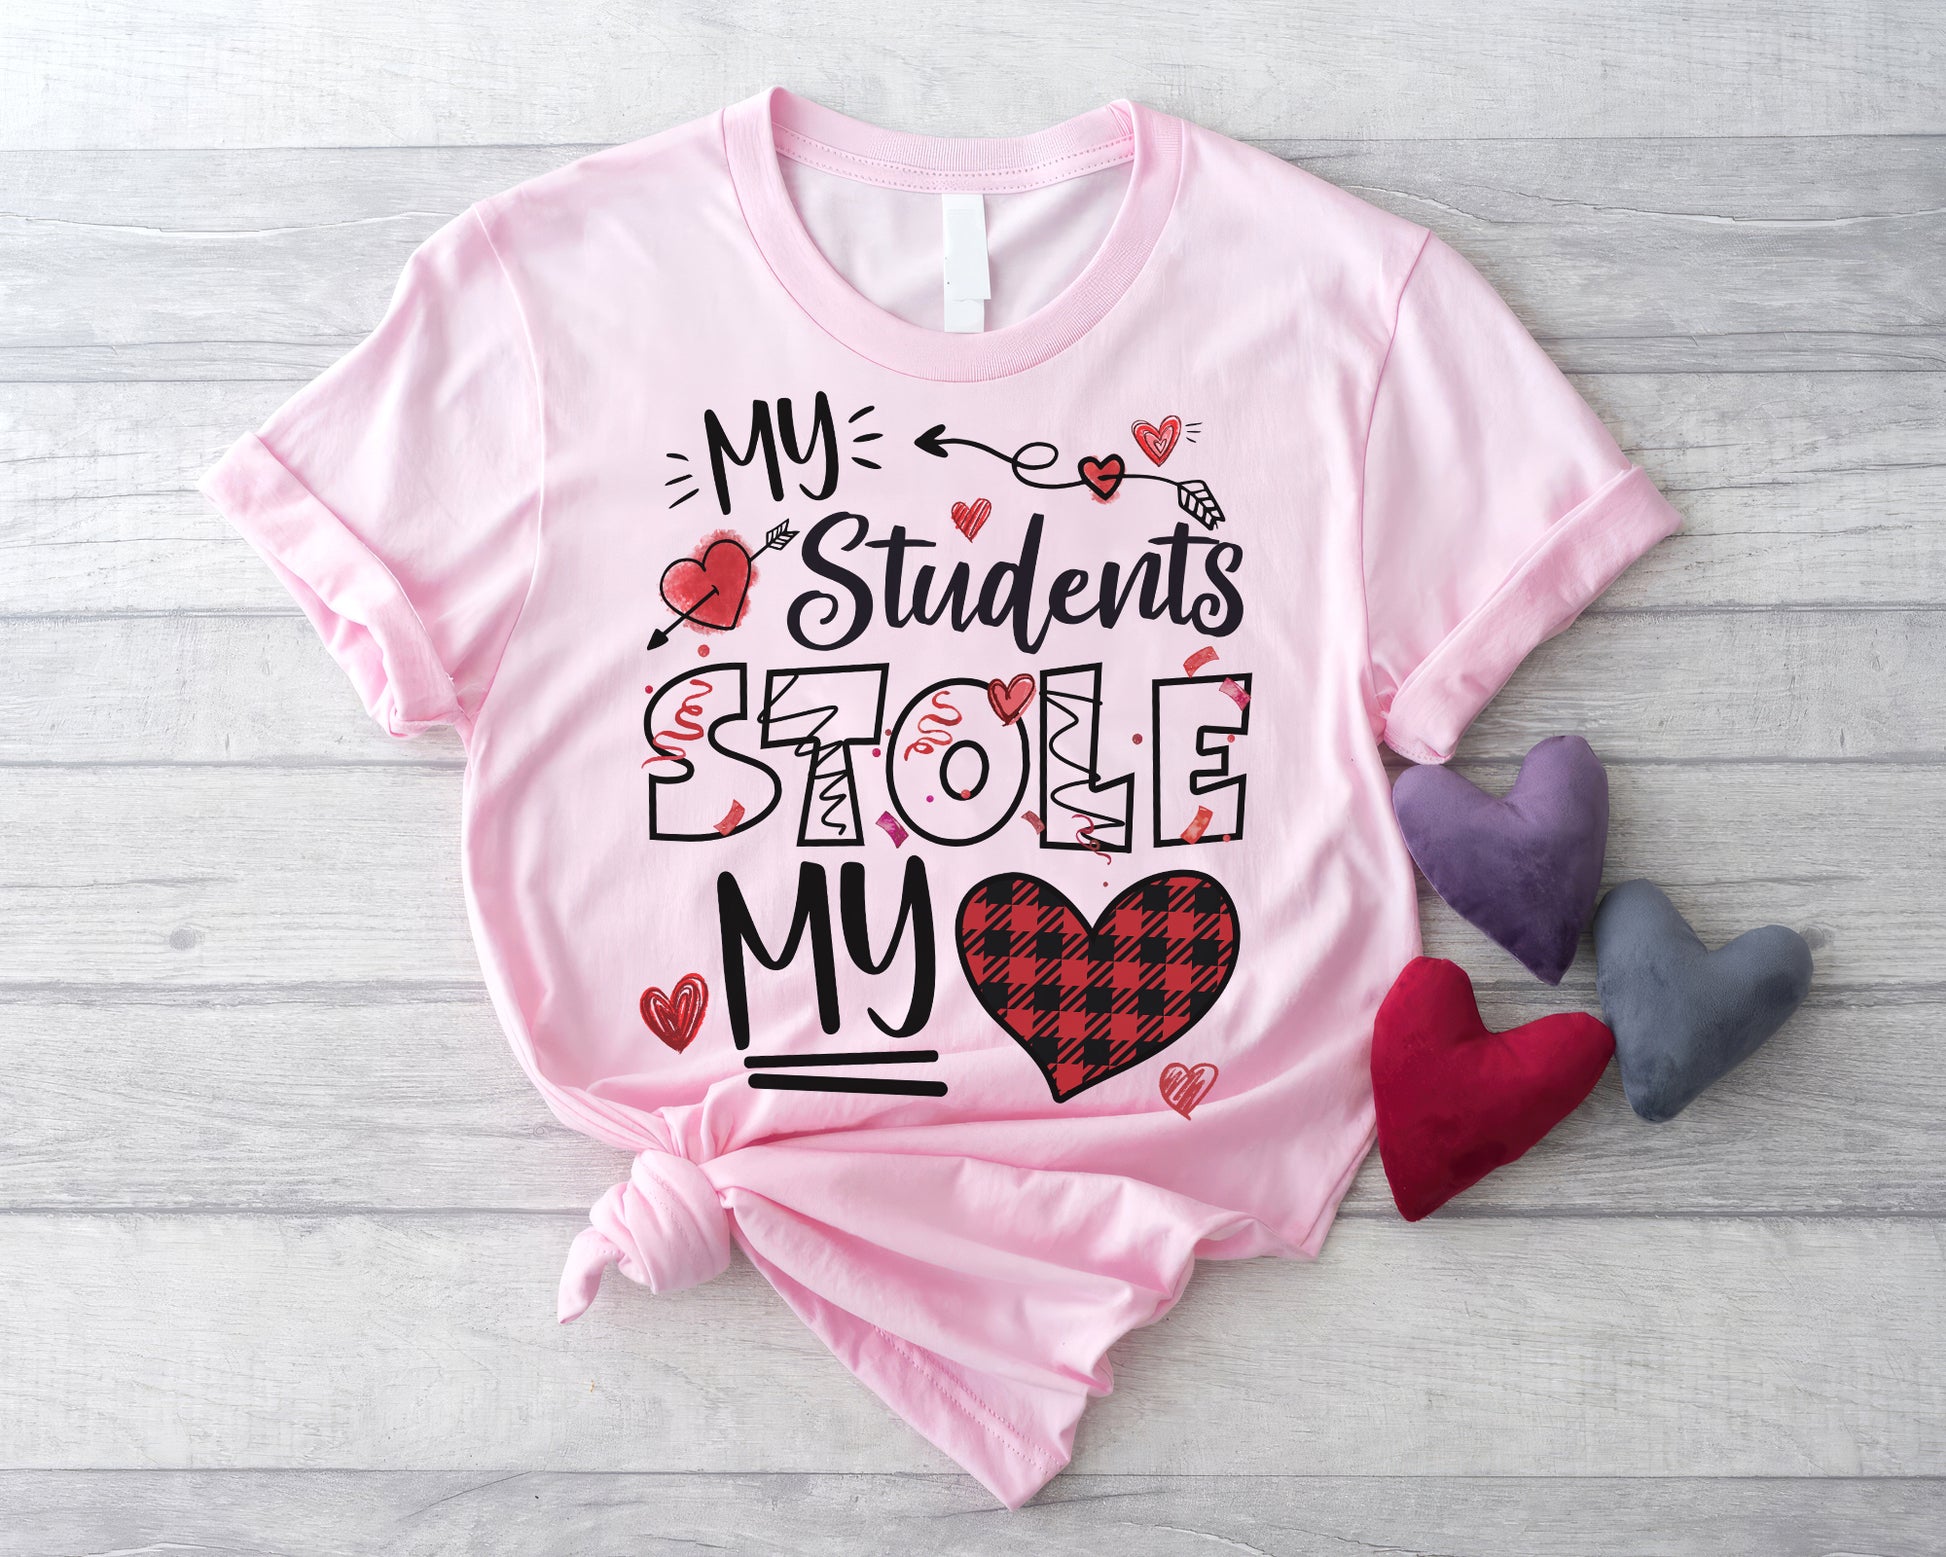 Tee Art Online Valentine My Students Stole My Heart Personalized Classic Unisex Tee | Valentine's Day Kawaii Cute T-shirts | Education Teacher Design- pink